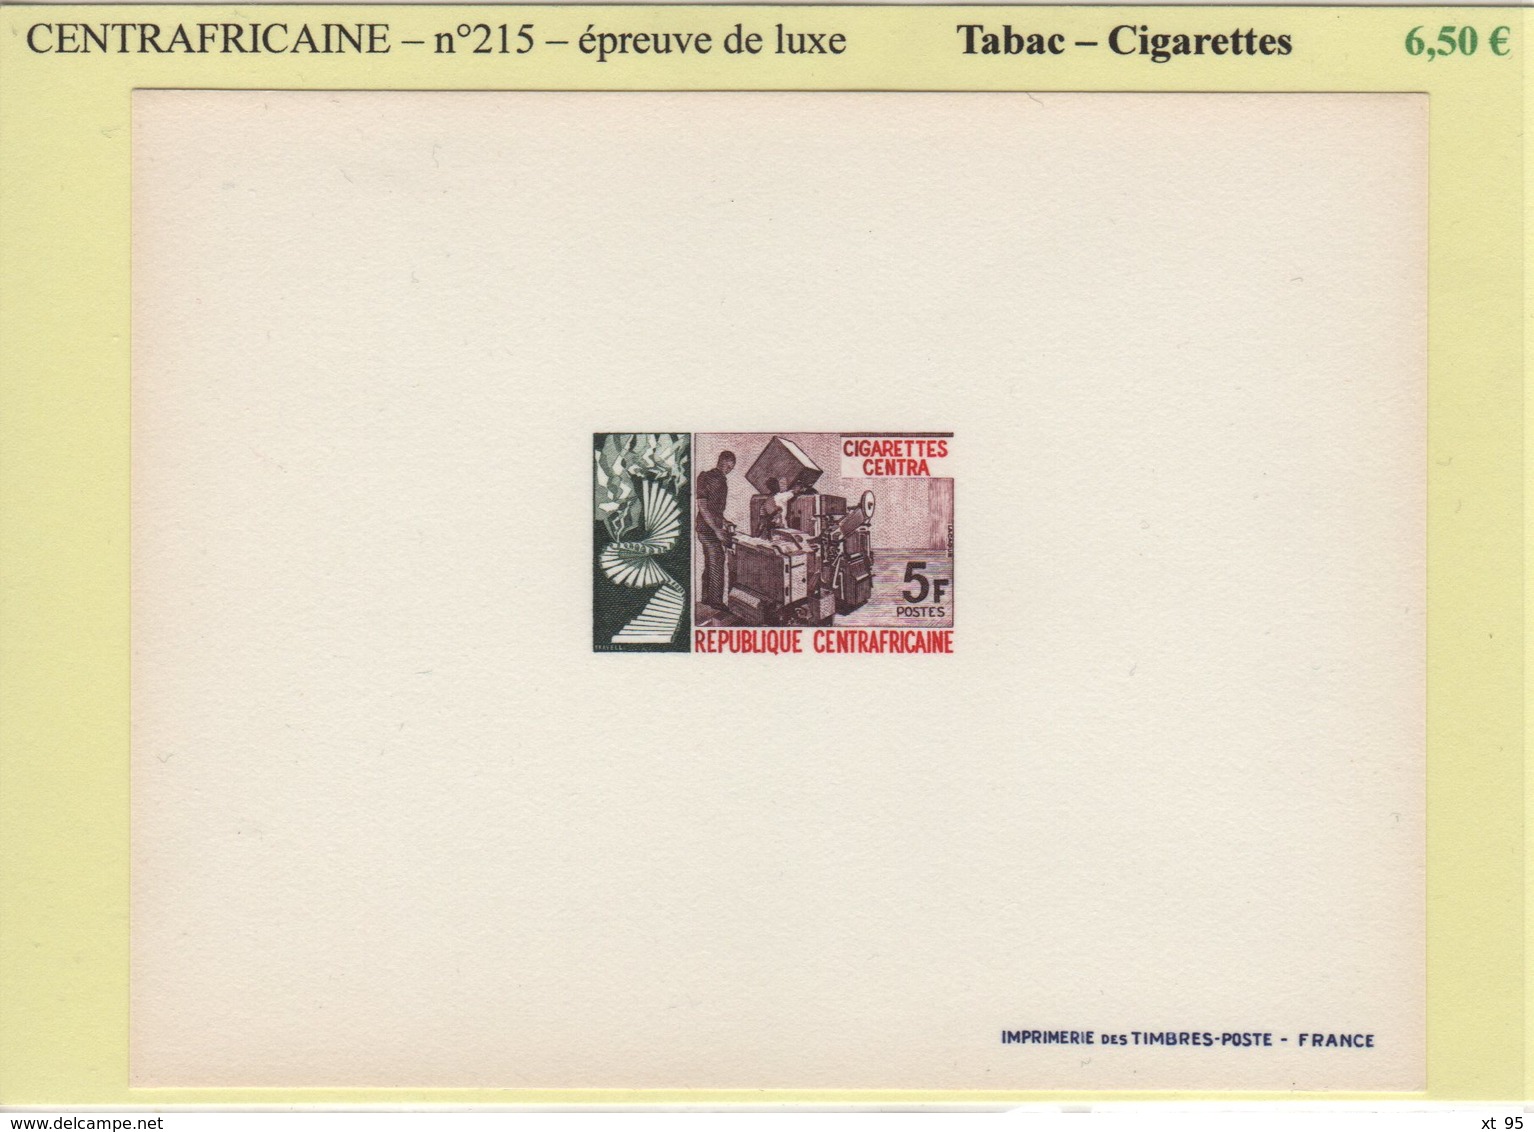 Centrafricaine - Epreuve De Luxe - N°215 - Tabac Cigarettes - Central African Republic